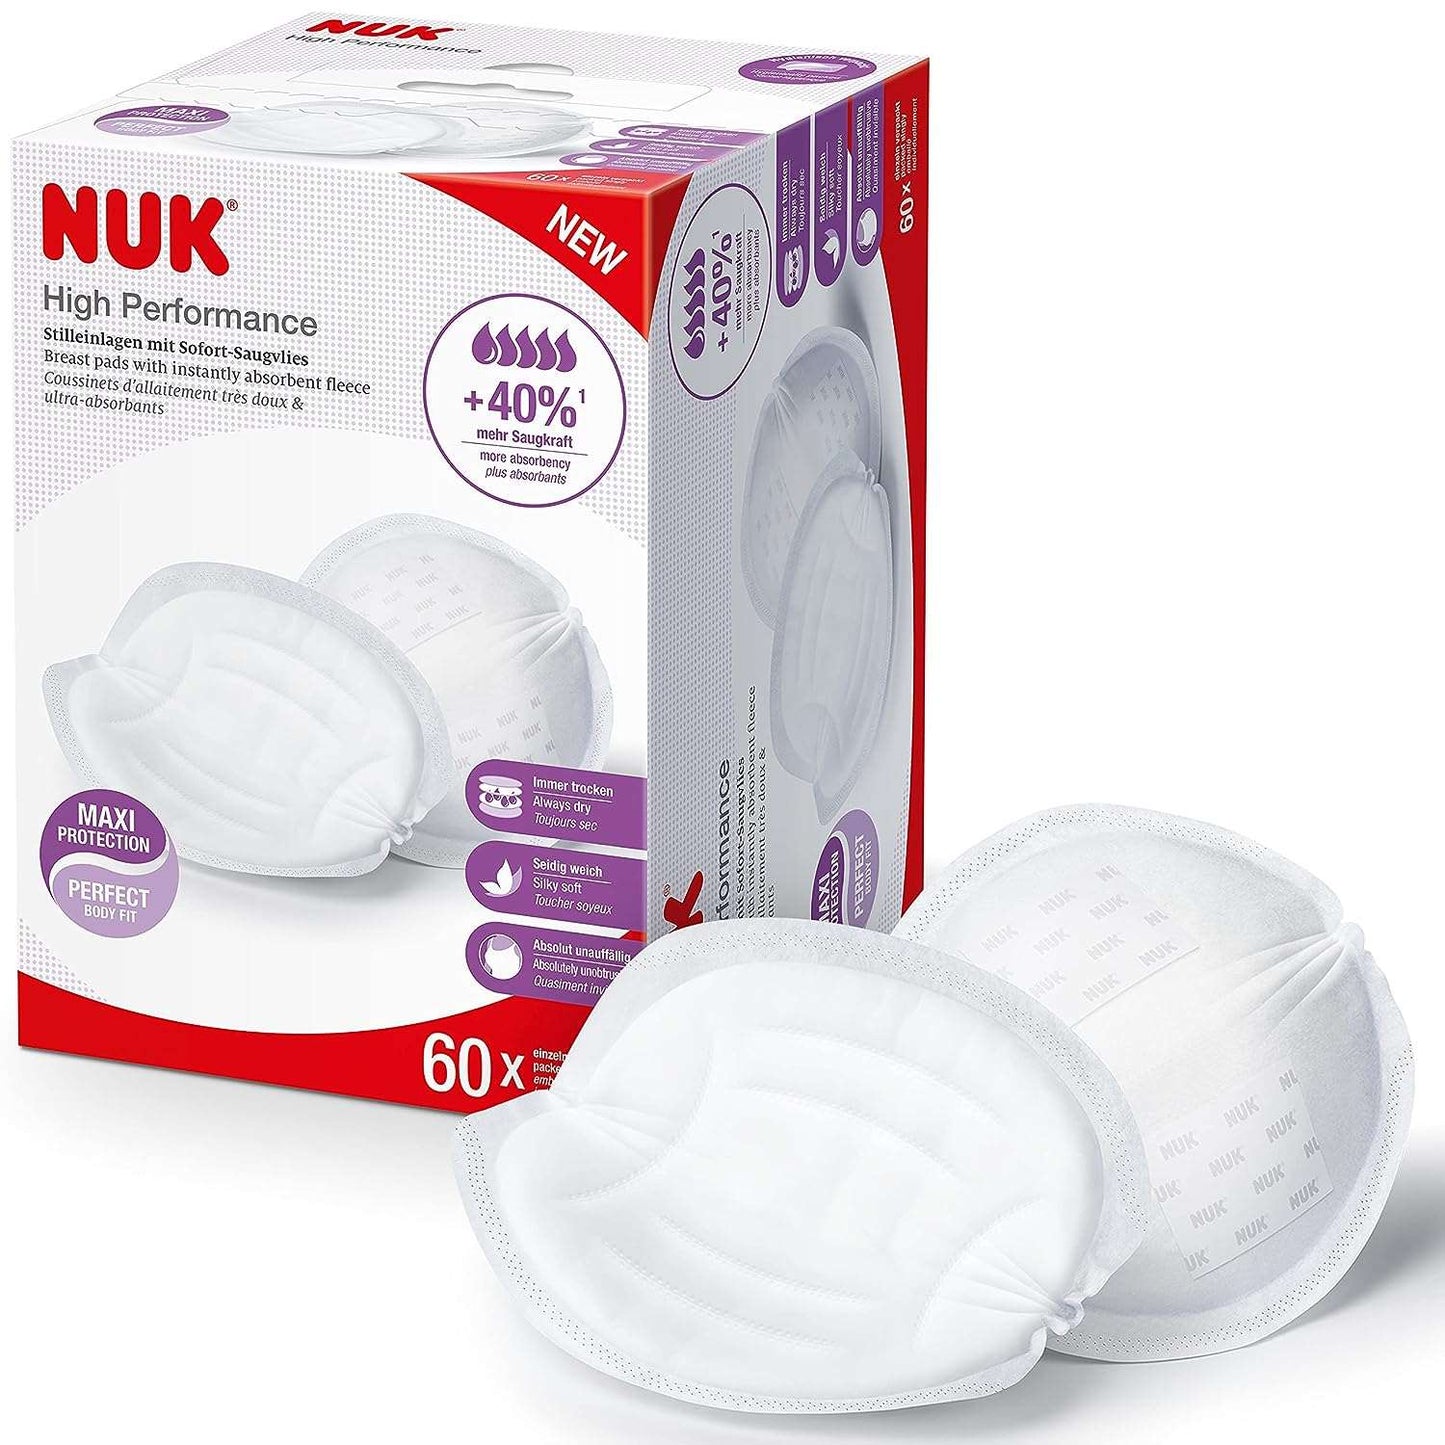 NUK High Performance Breast Pads, Pack of 60, White